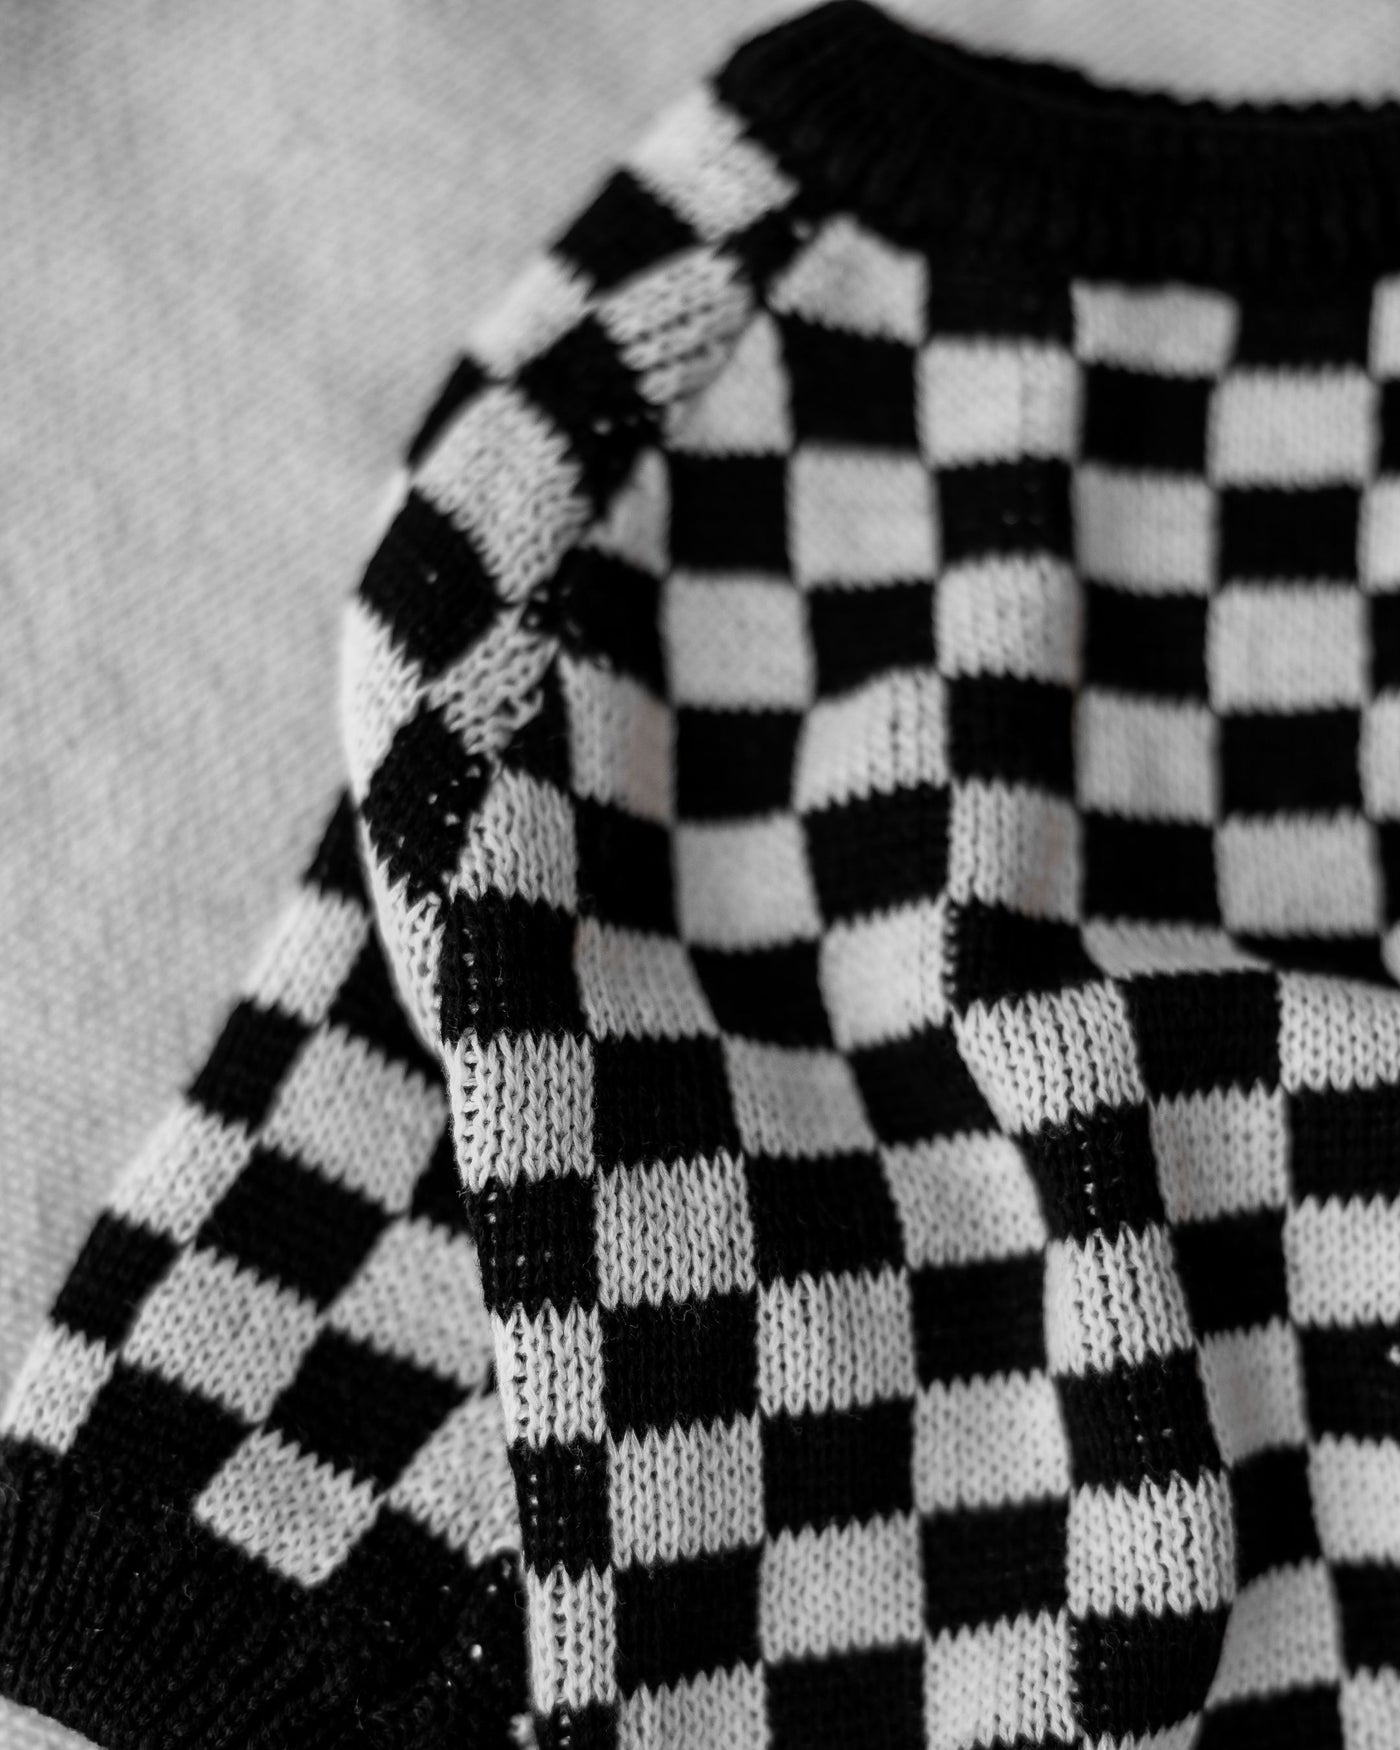 Arlo Black Check Sweater Product Image Detail